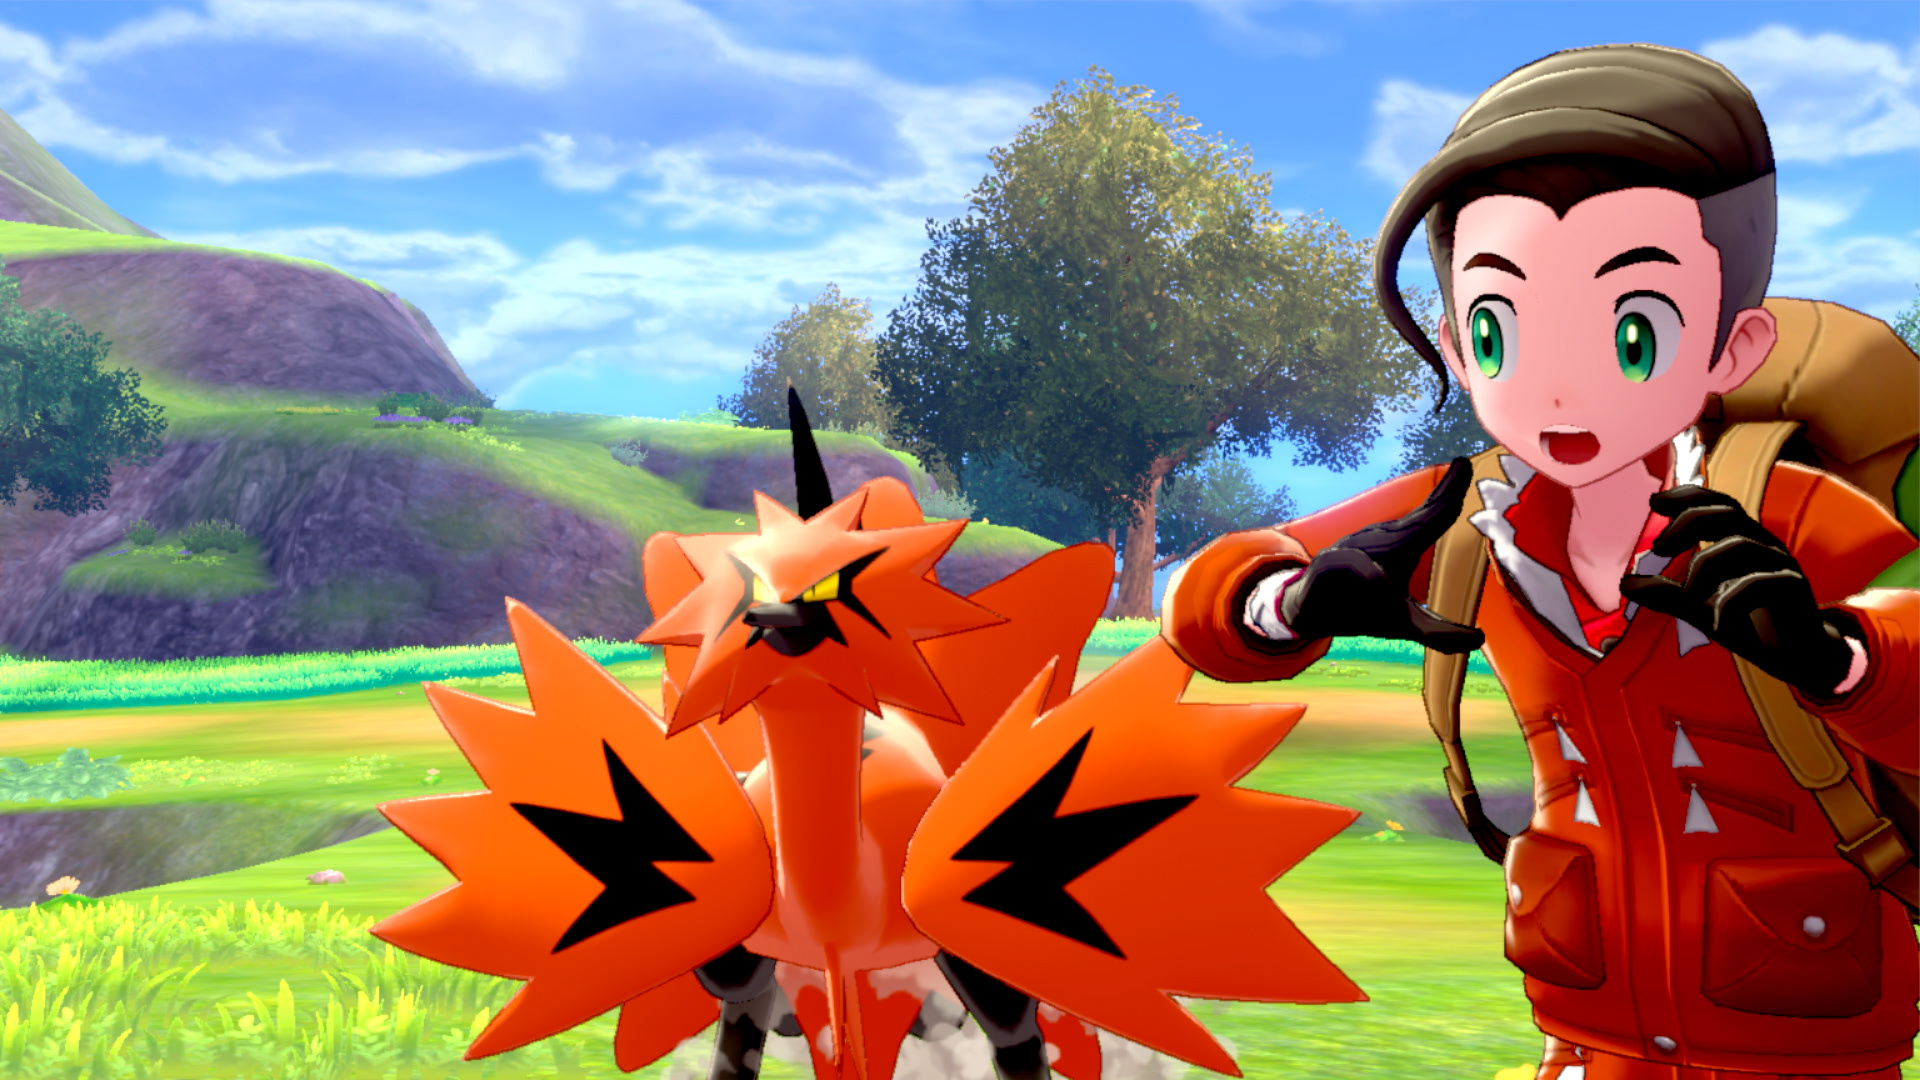 1up VS CPU: Pokémon Sword and Shield Expansion Pass: The Crown Tundra Review